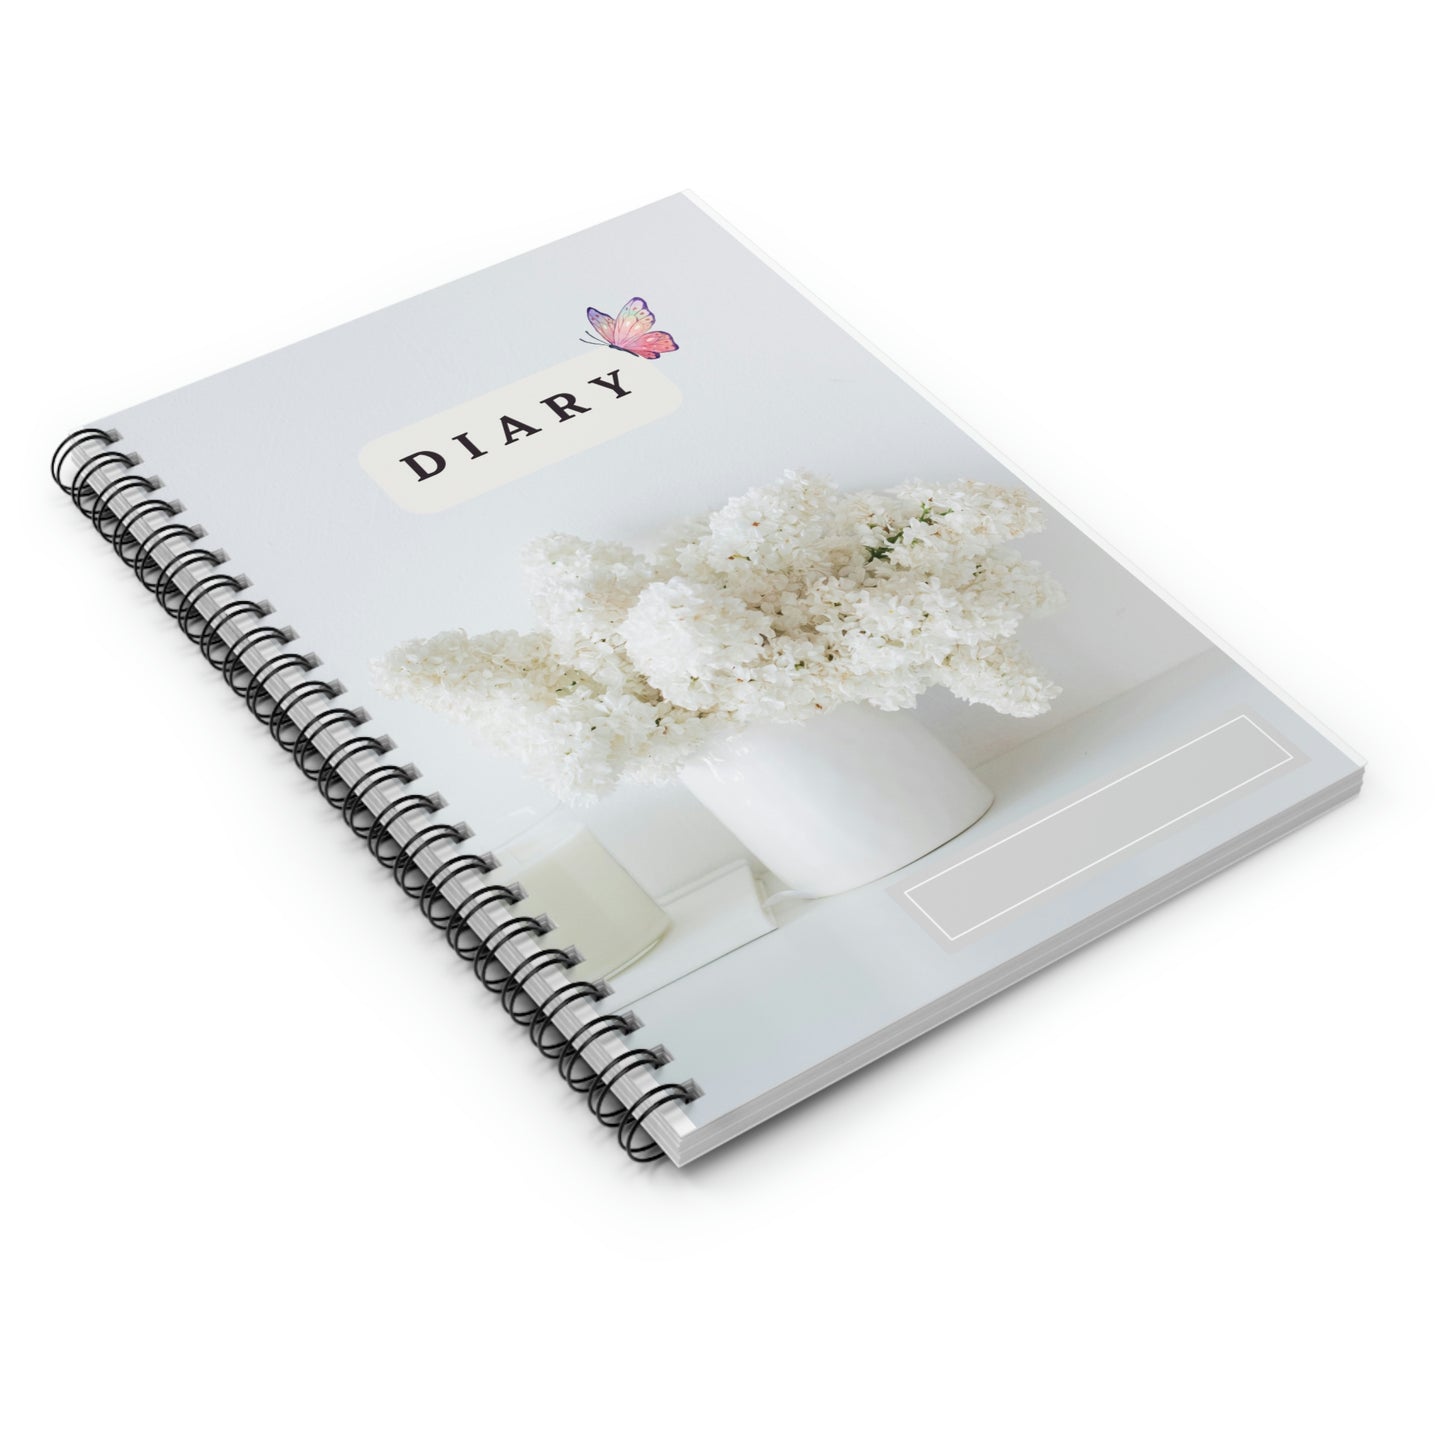 White Flower with Butterfly design Diary/Spiral Notebook - Ruled Line 118 pages